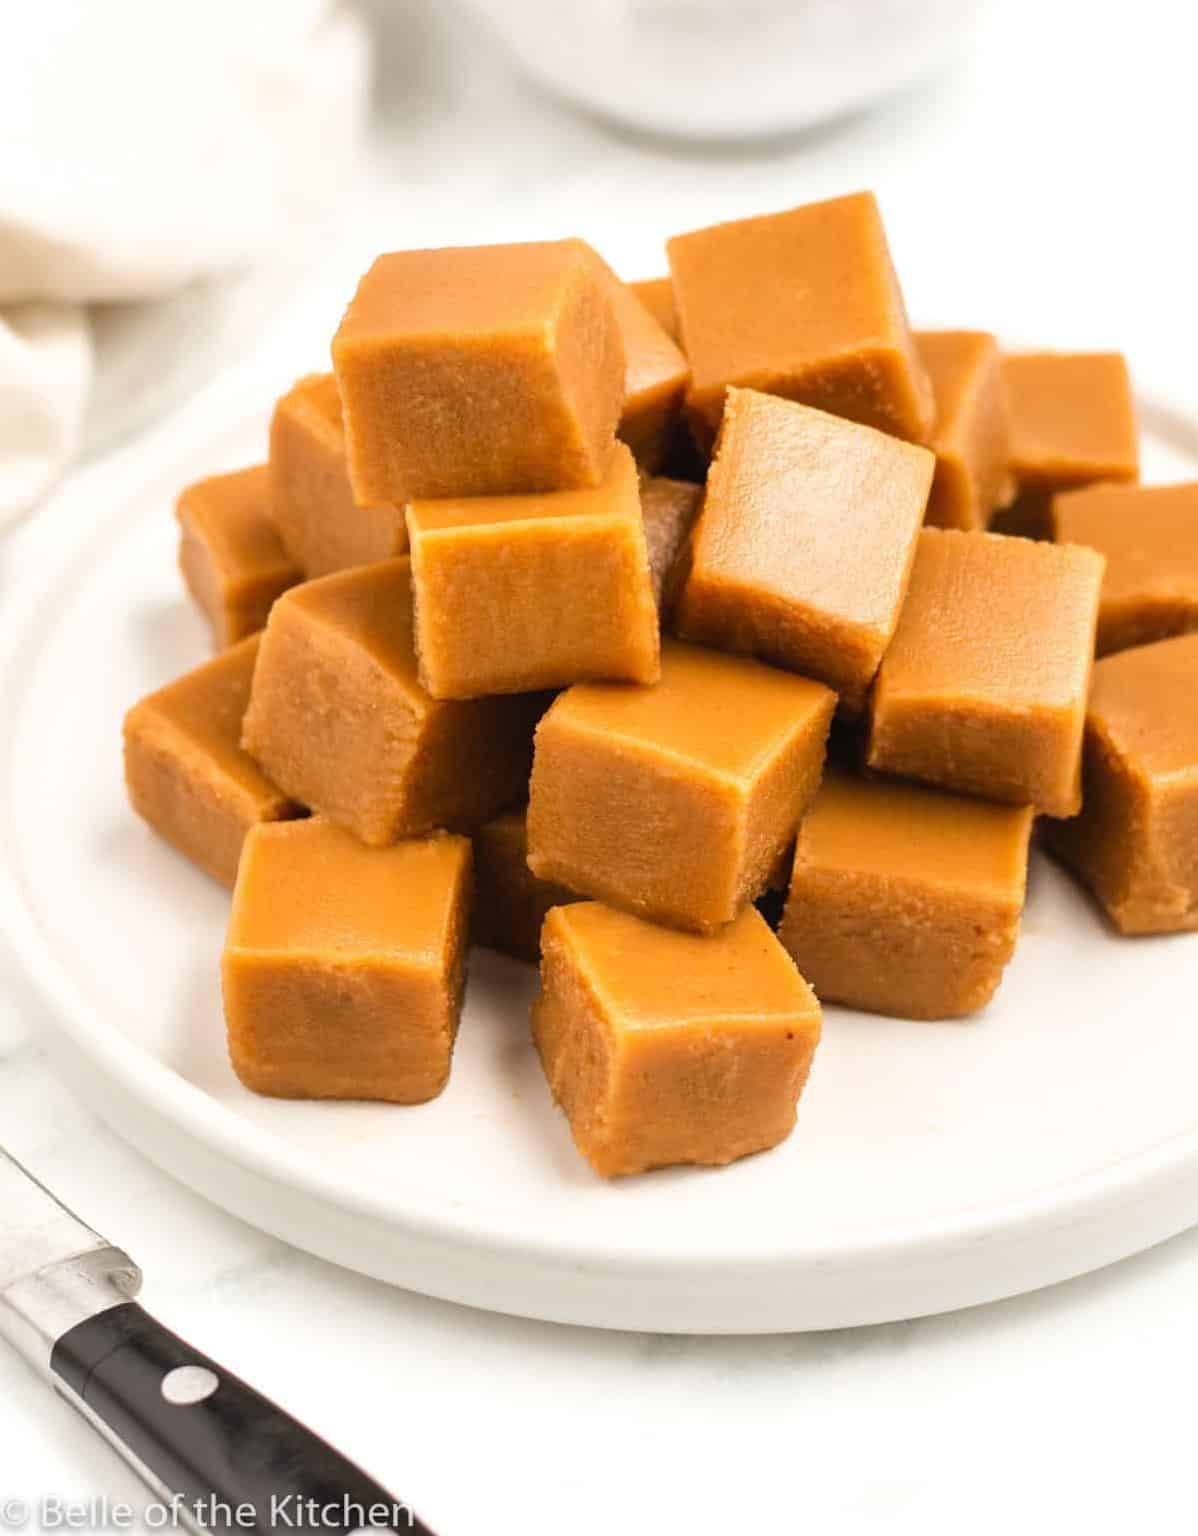  Can you resist the temptation of this delicious peanut butter fudge?